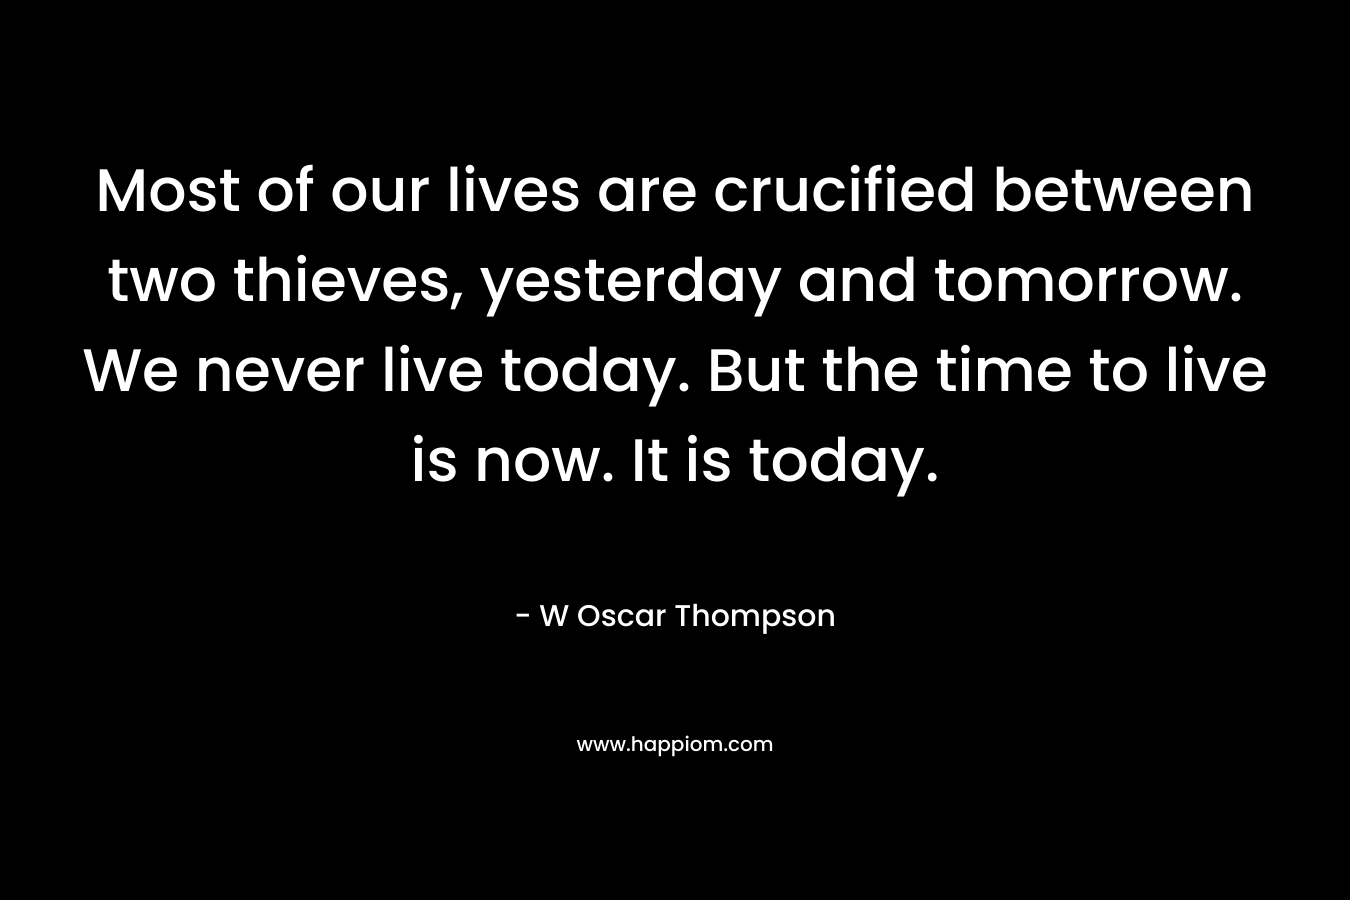 Most of our lives are crucified between two thieves, yesterday and tomorrow. We never live today. But the time to live is now. It is today.